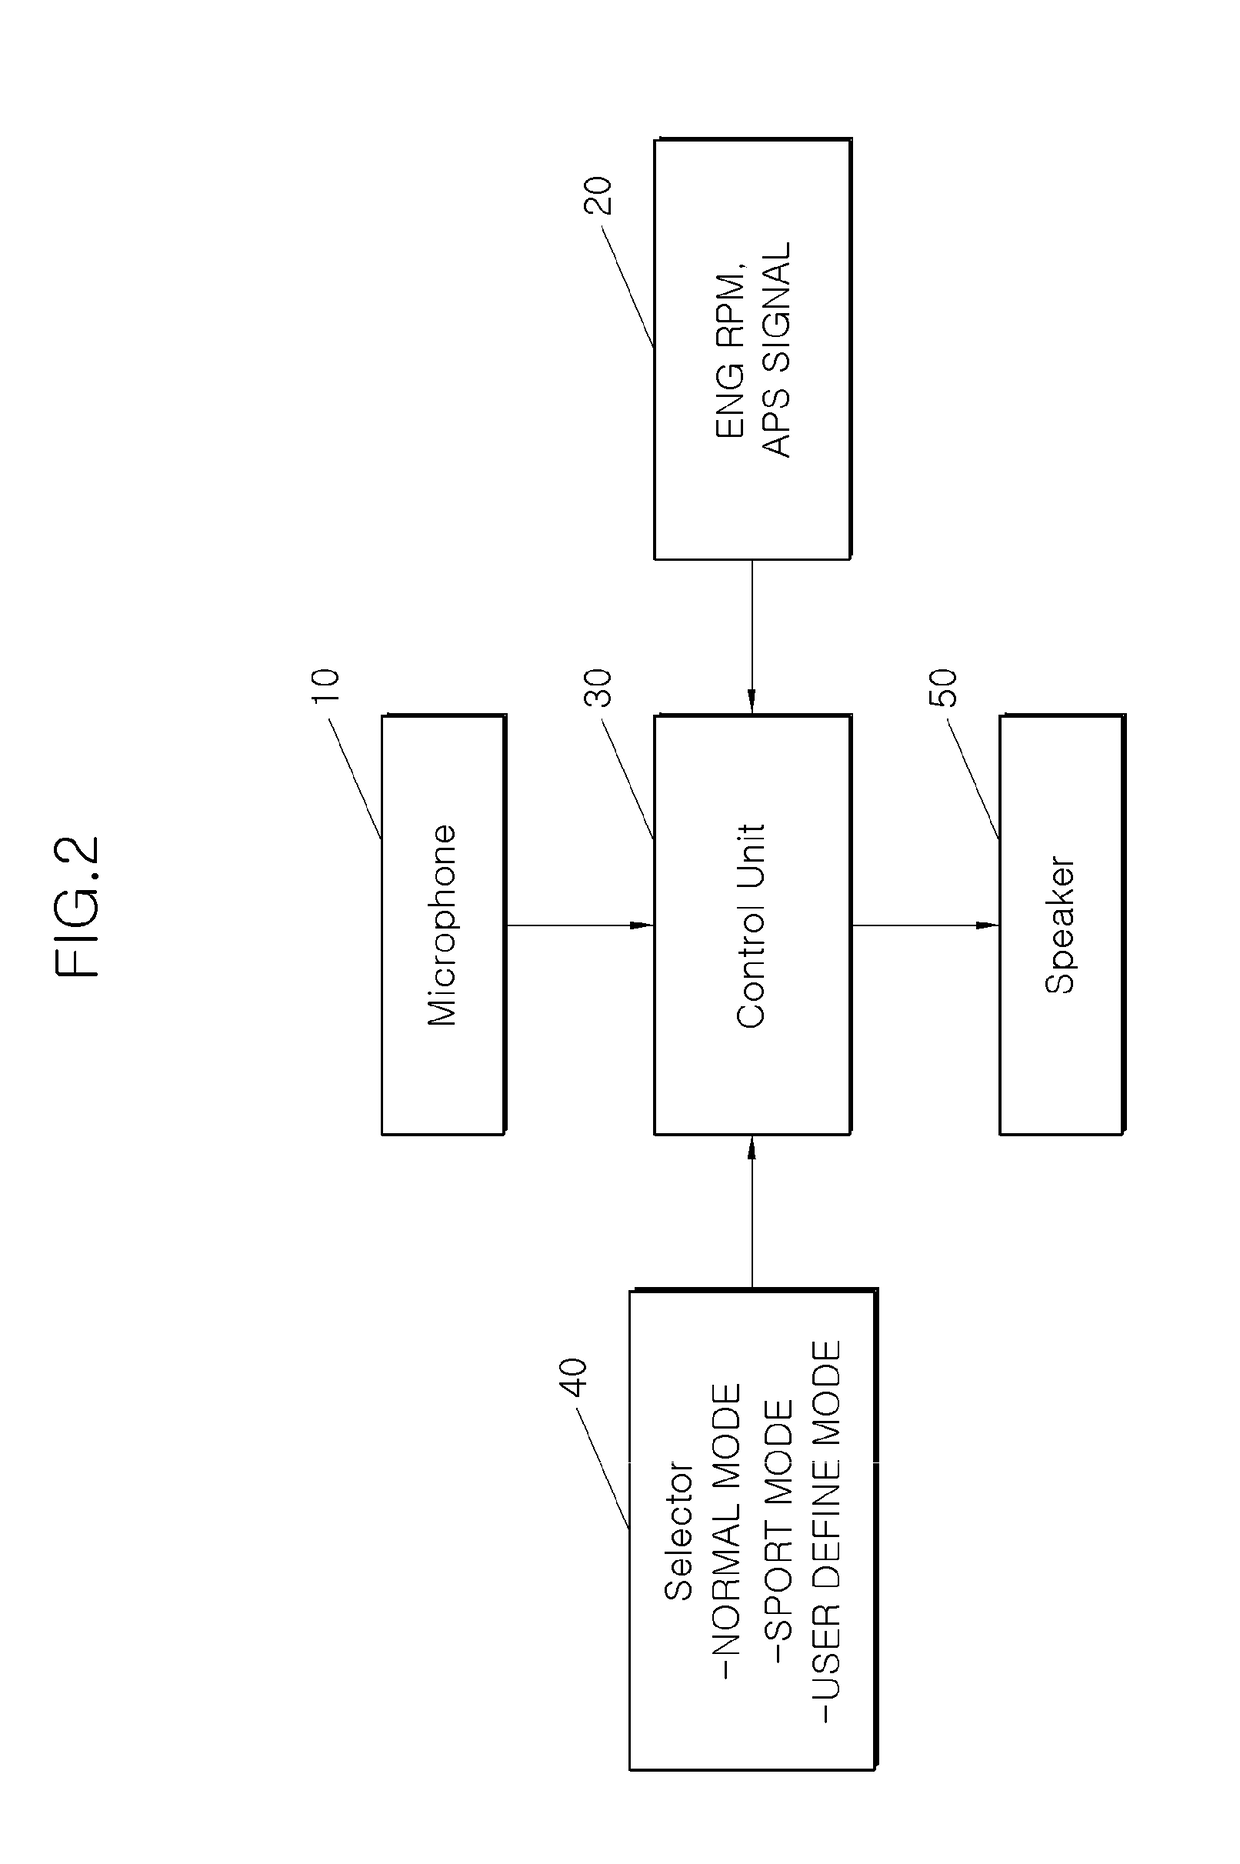 Apparatus for controlling engine noise reflecting engine vibration and driving conditions